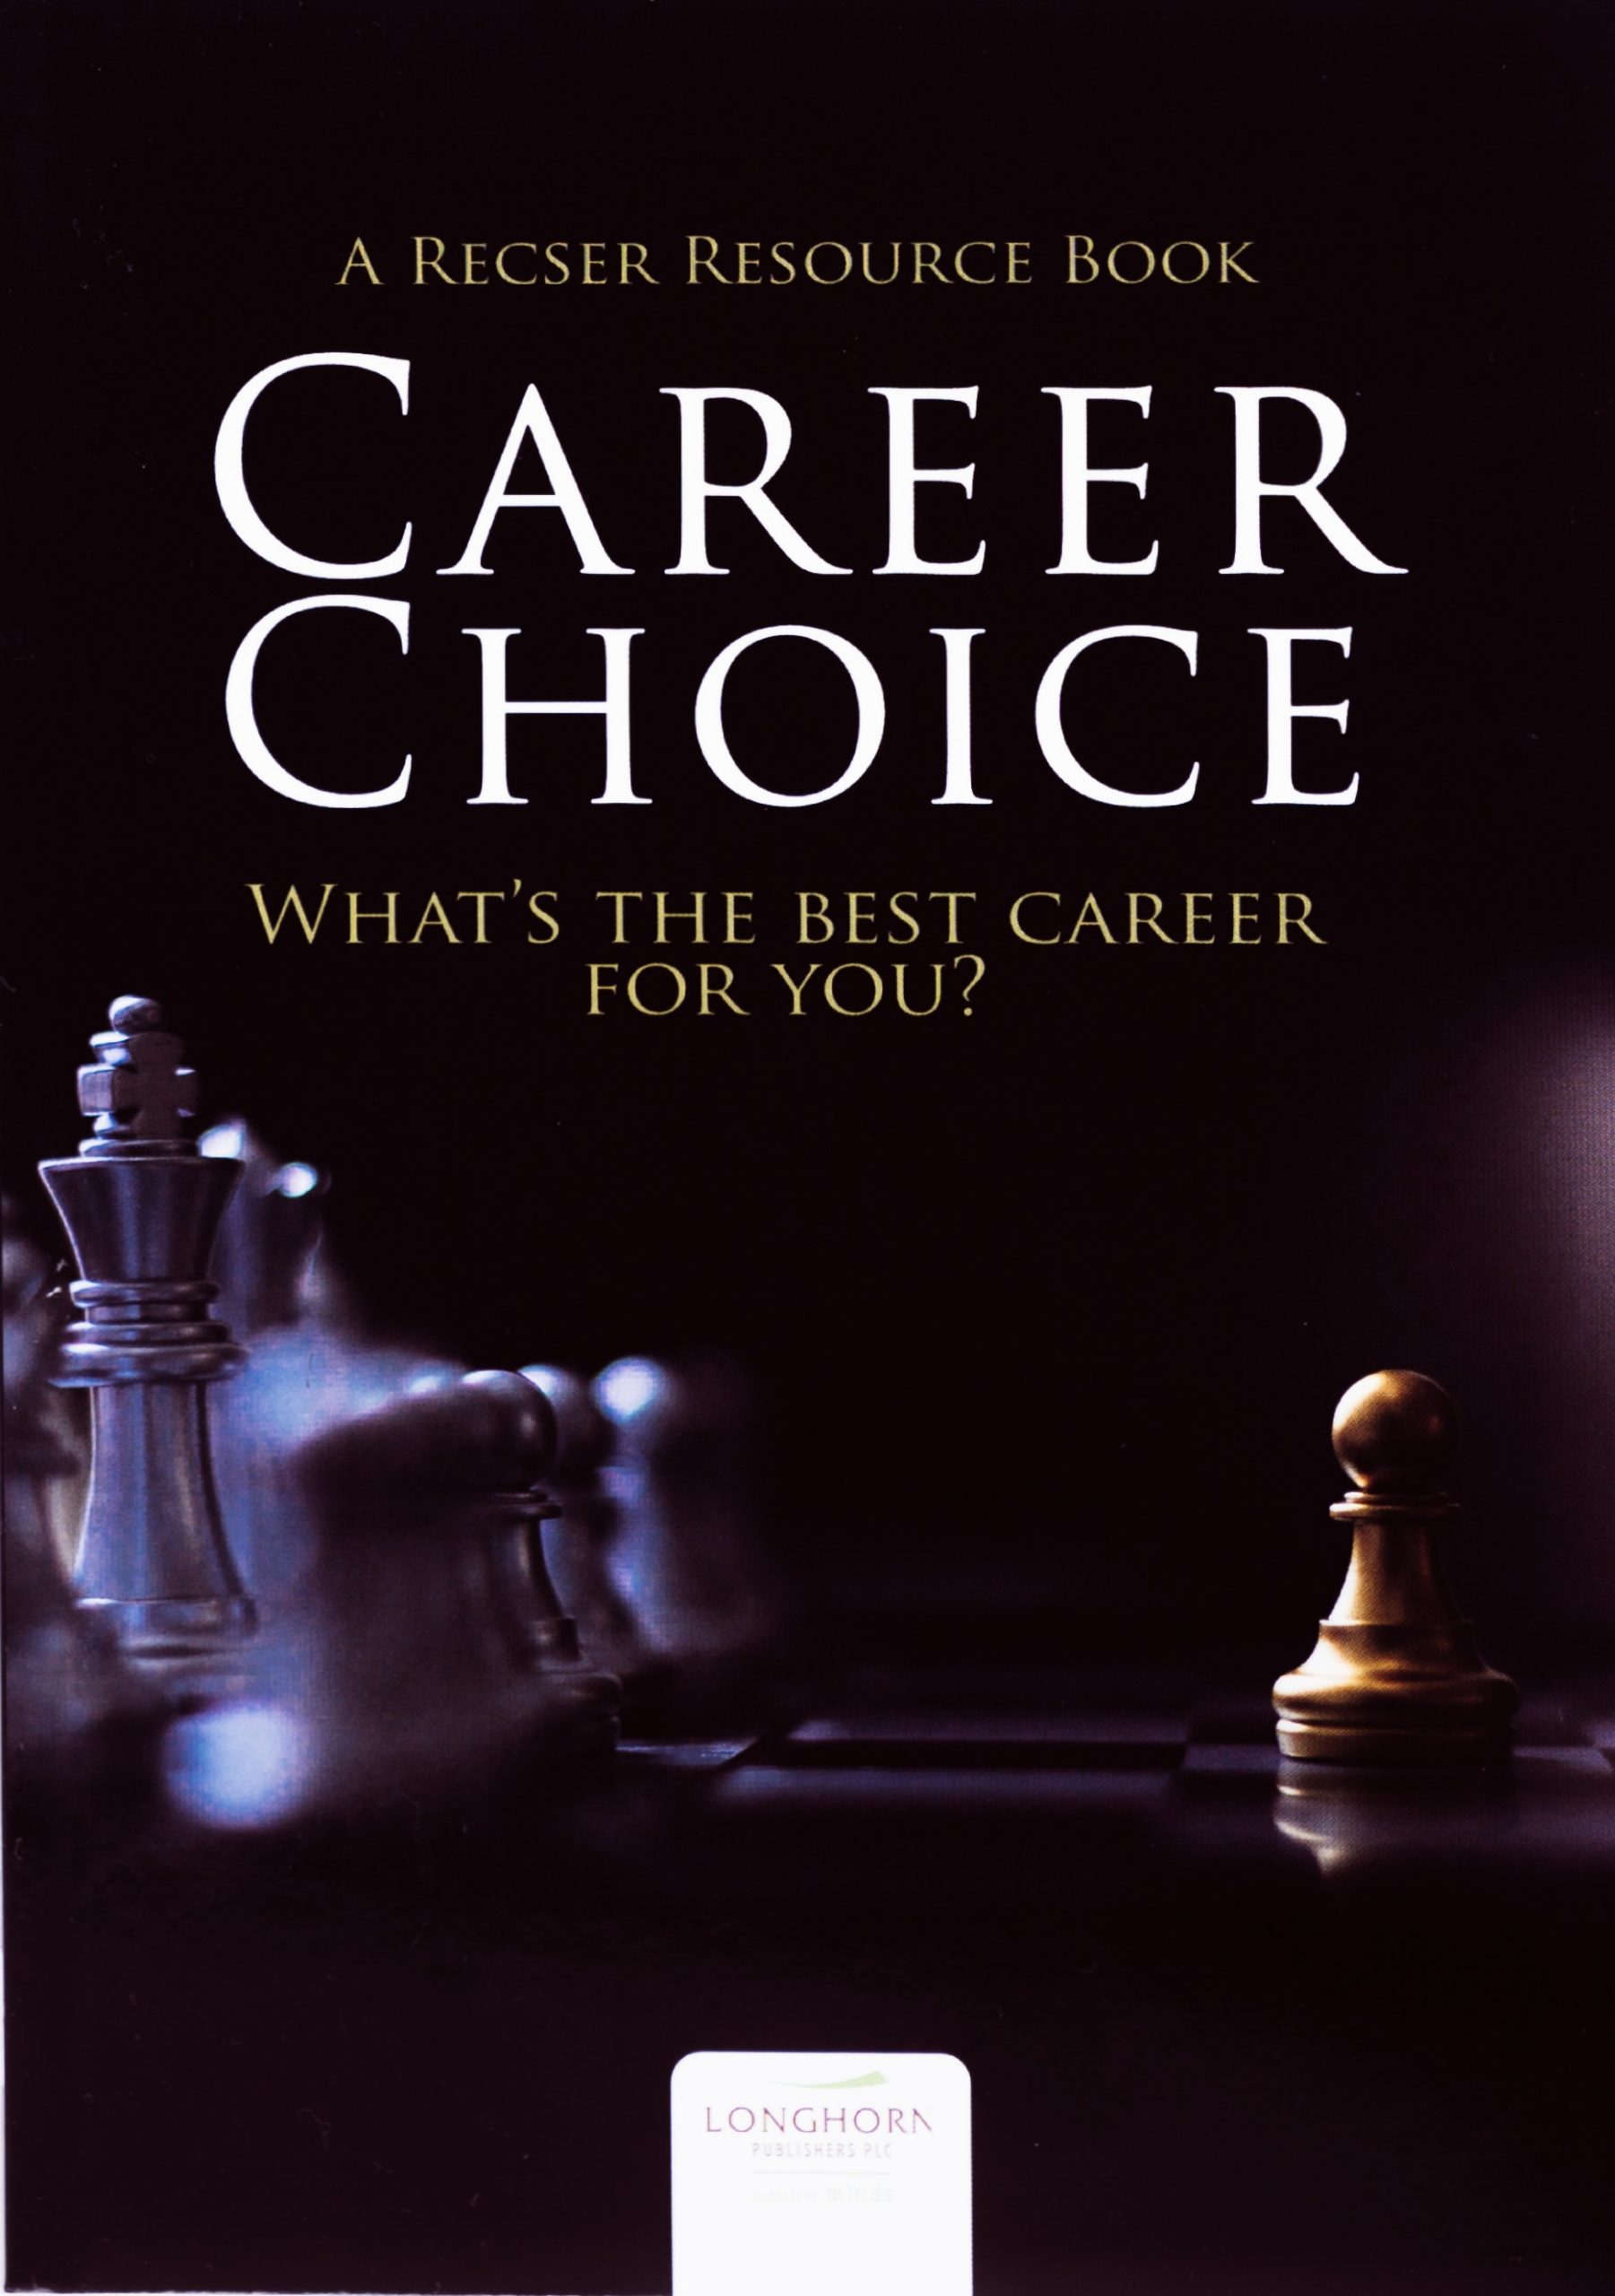 CAREER CHOICE: WHAT'S THE BEST CAREER FOR YOU?